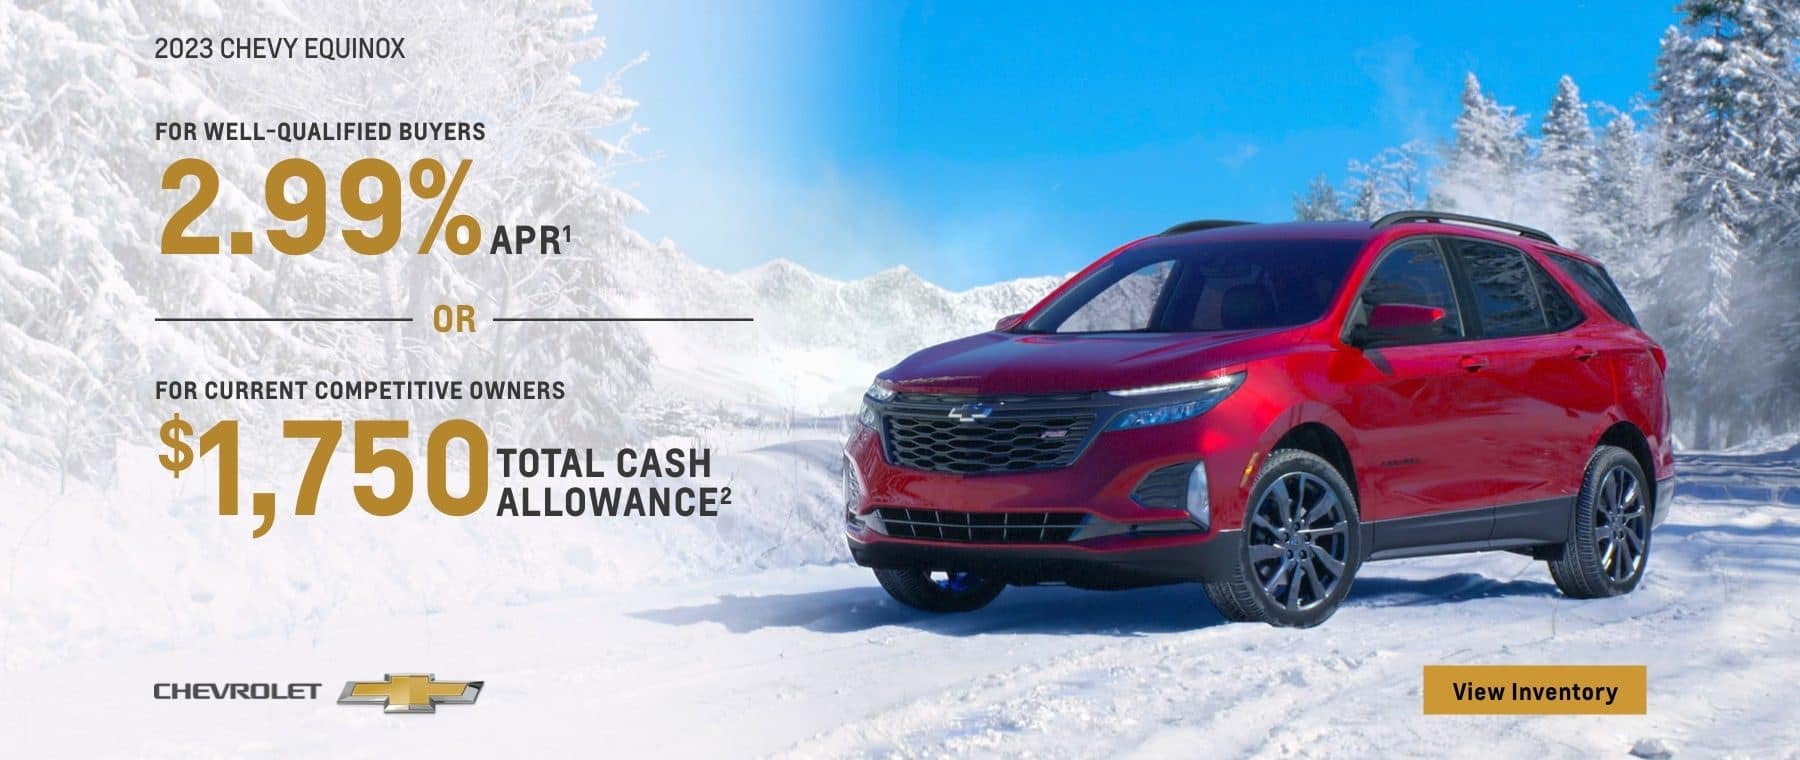 2023 Chevy Equinox. For well-qualified buyers 2.99% APR. Or, For current competitive owners $1,750 total cash allowance.